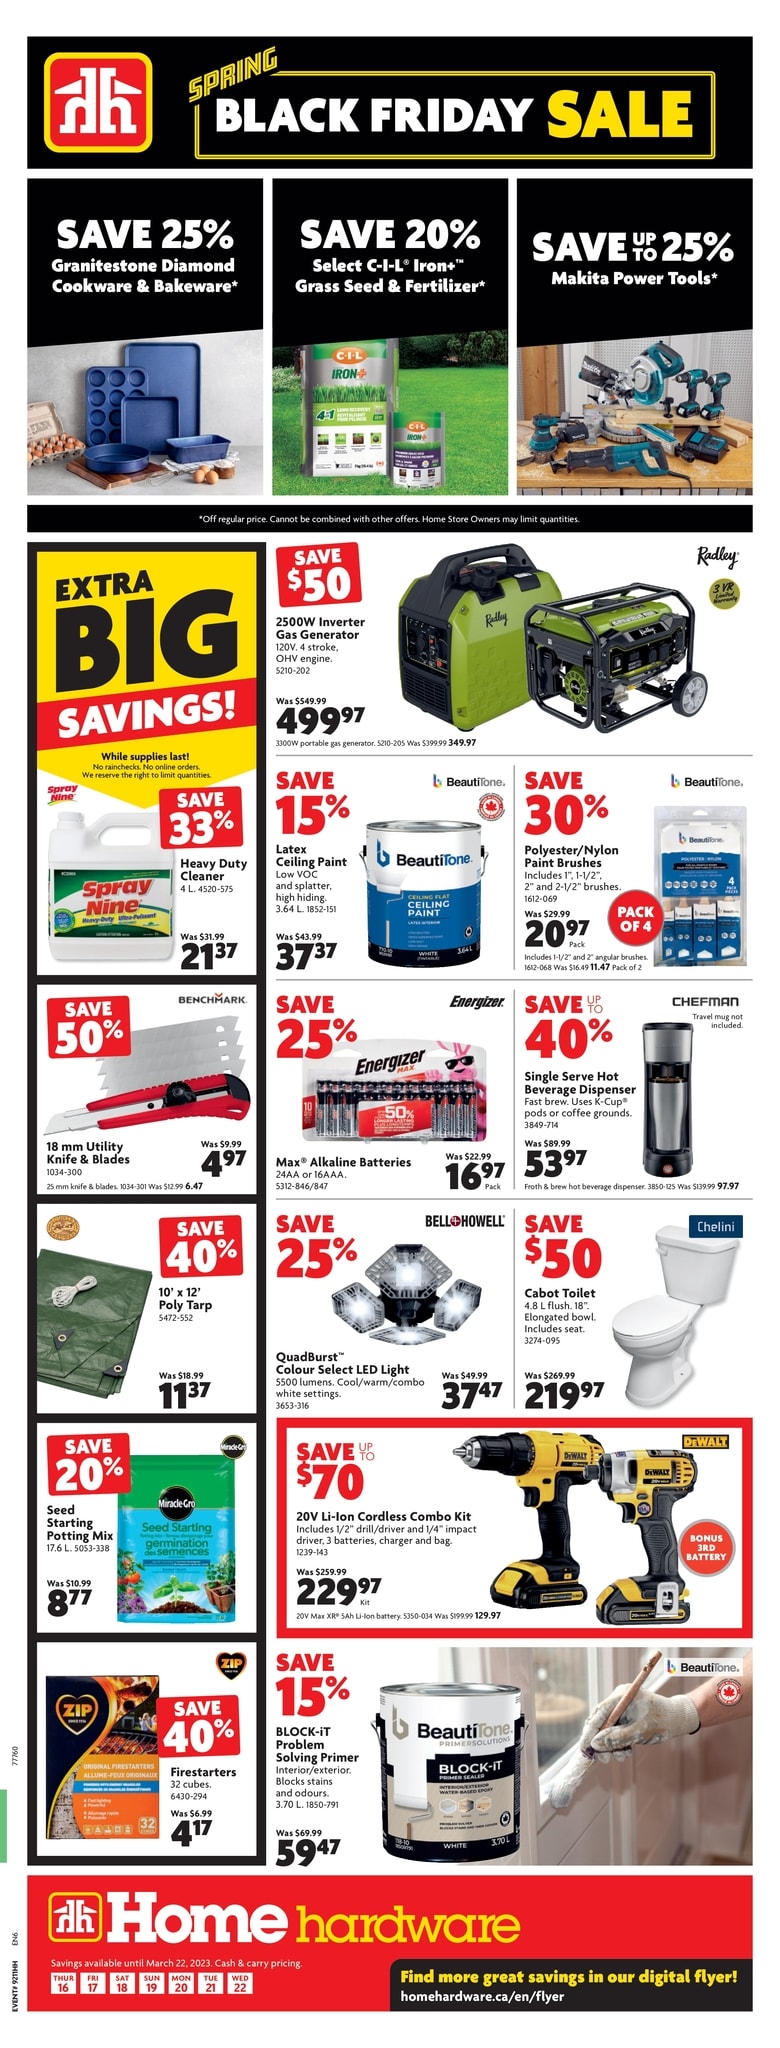 Home Hardware - Weekly Flyer Specials - Page 1